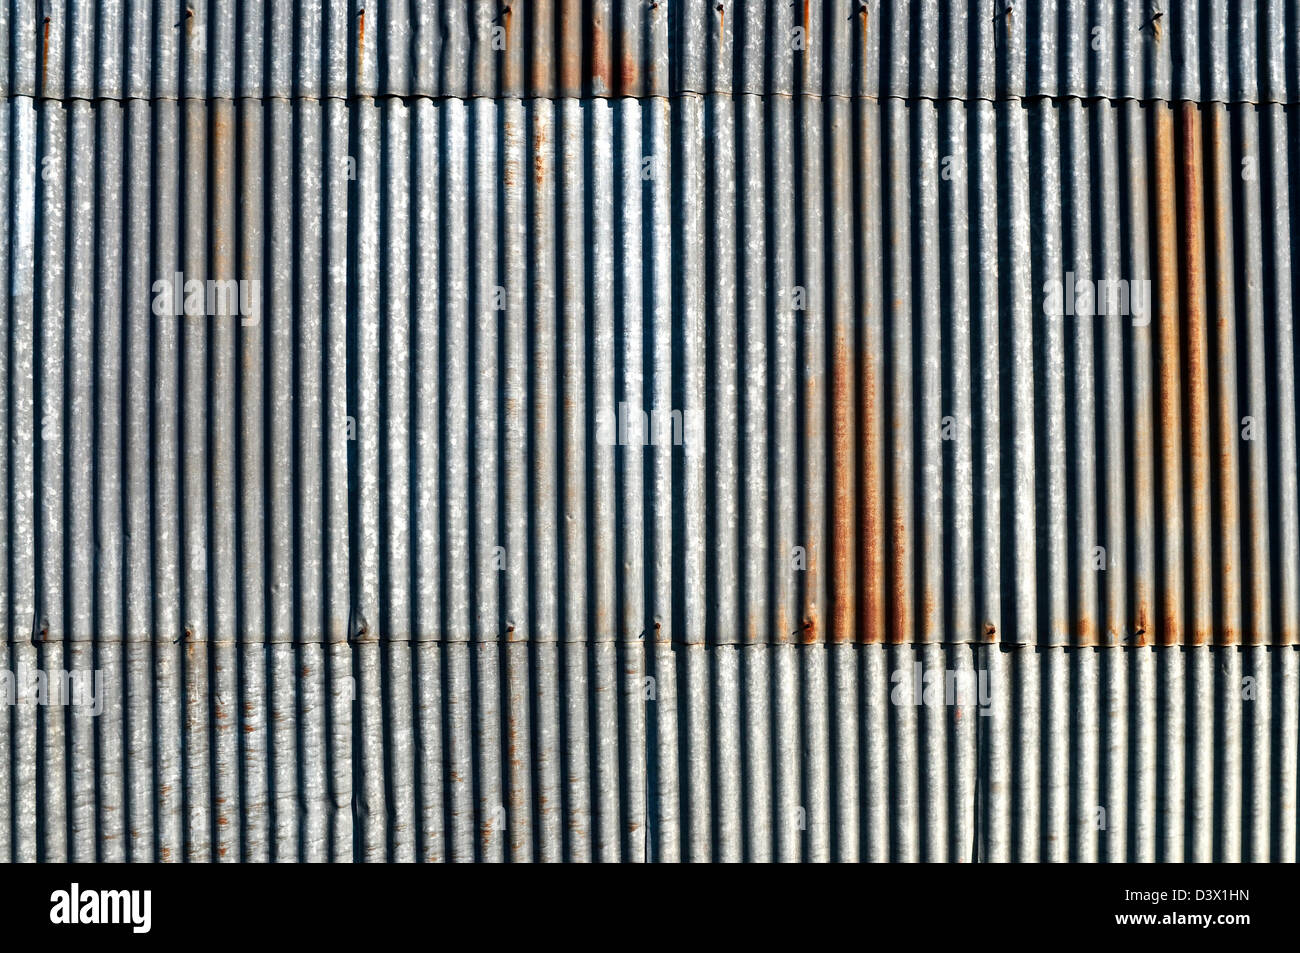 Corrugated metal sheets Stock Photo by ©zkruger 5993723